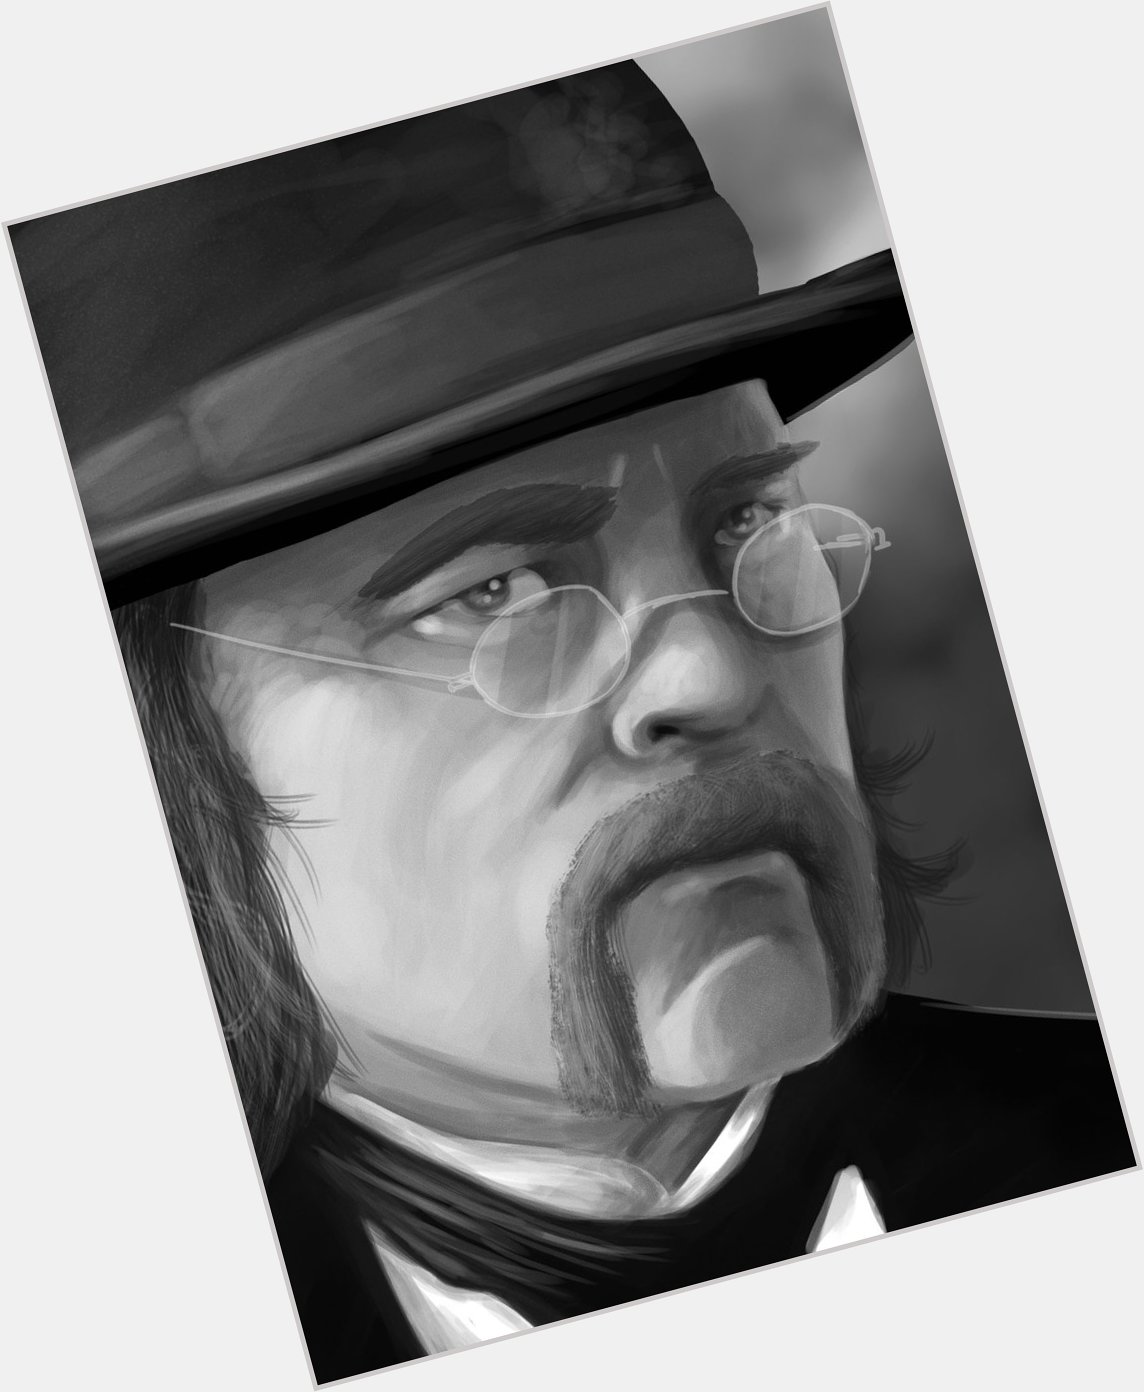 Feels good to have drawn something, if only for a few hours. Happy birthday to Brad Dourif. 